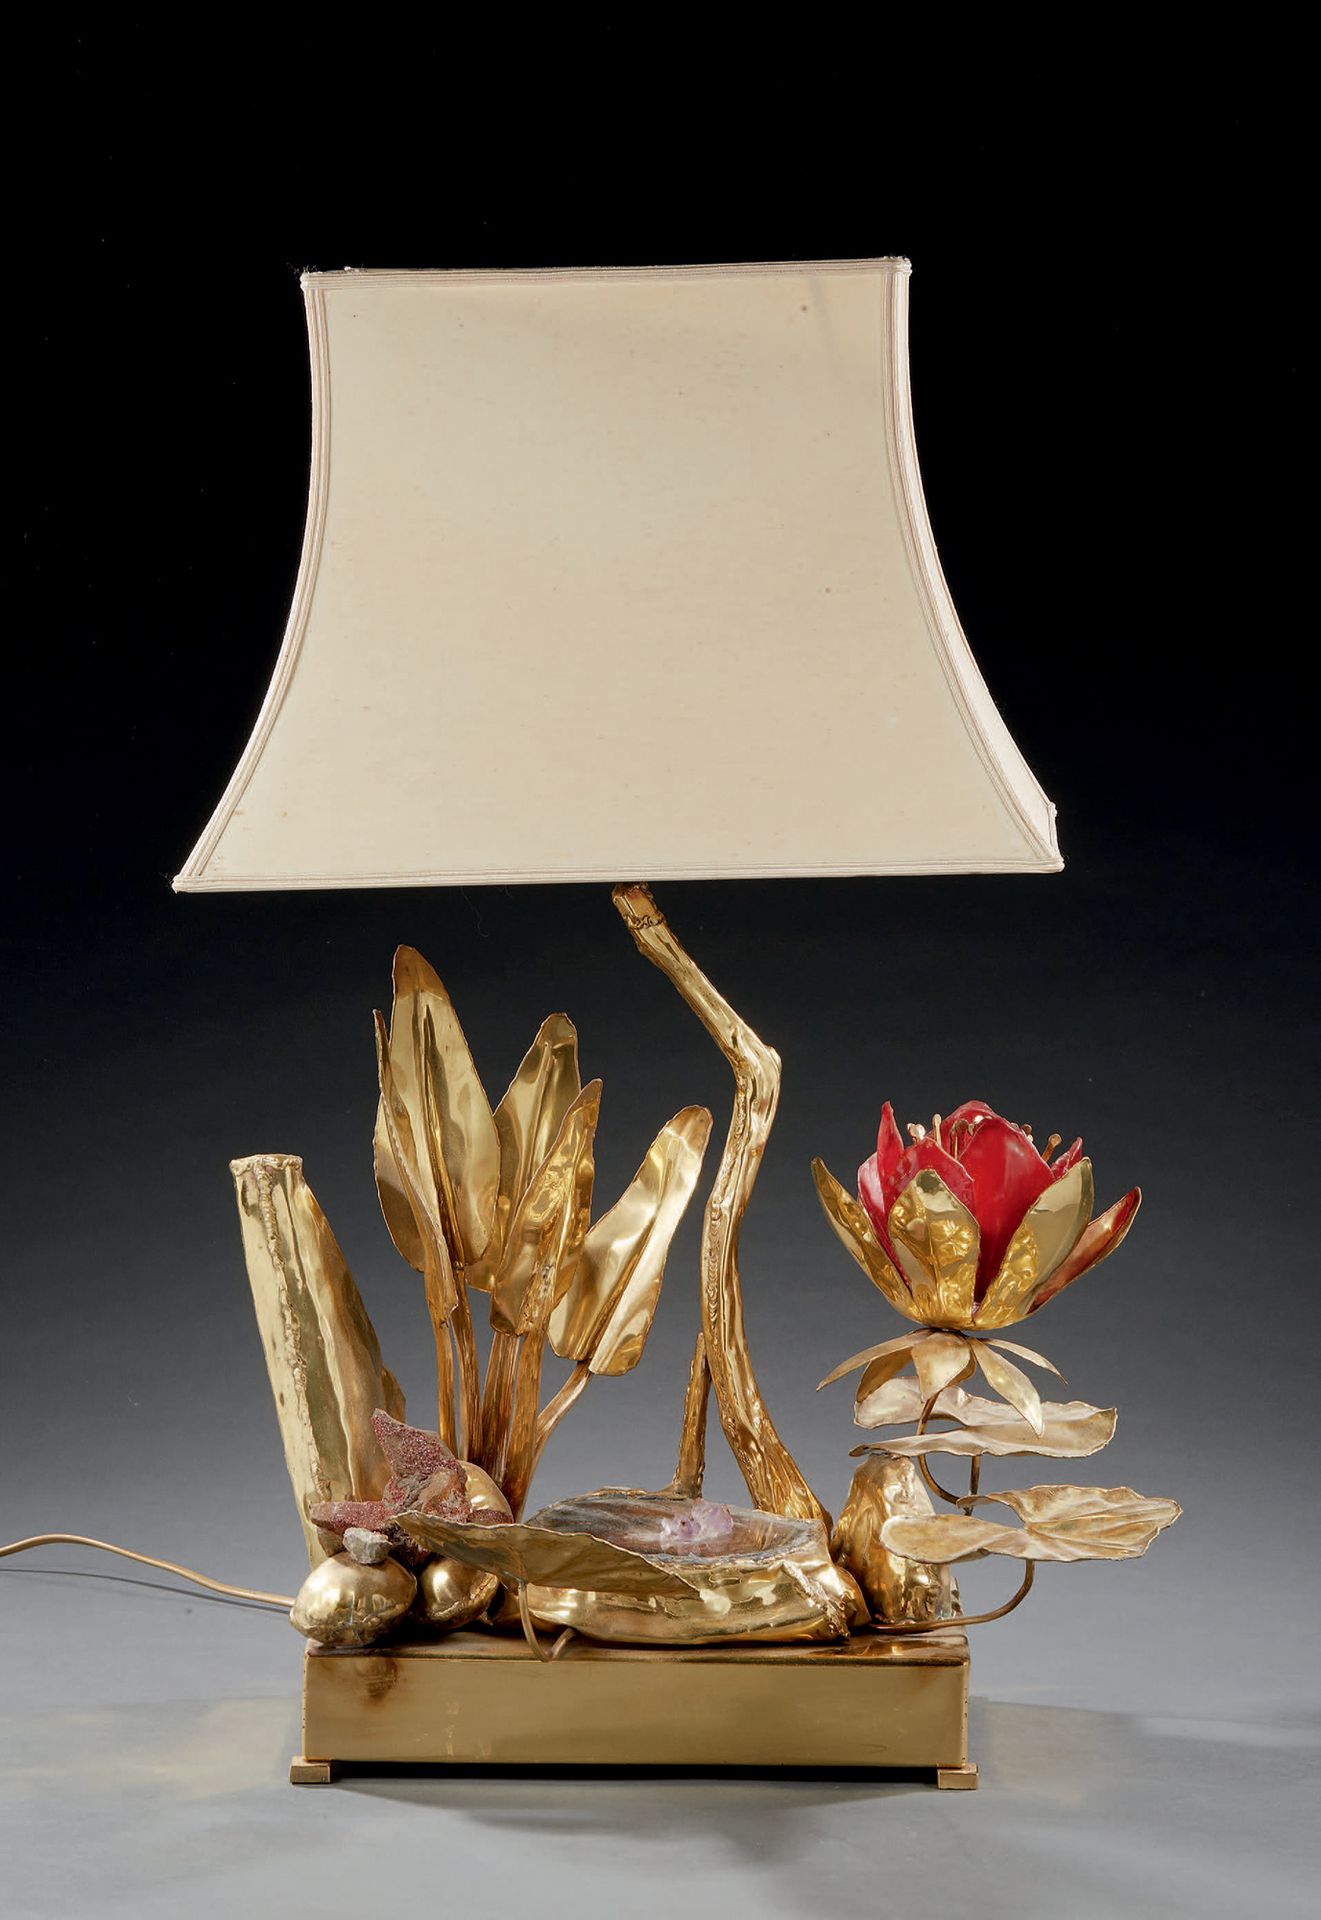 TRAVAIL DES ANNÉES 1970 
Lamp in gilded metal, hard stone and red glass with wat&hellip;